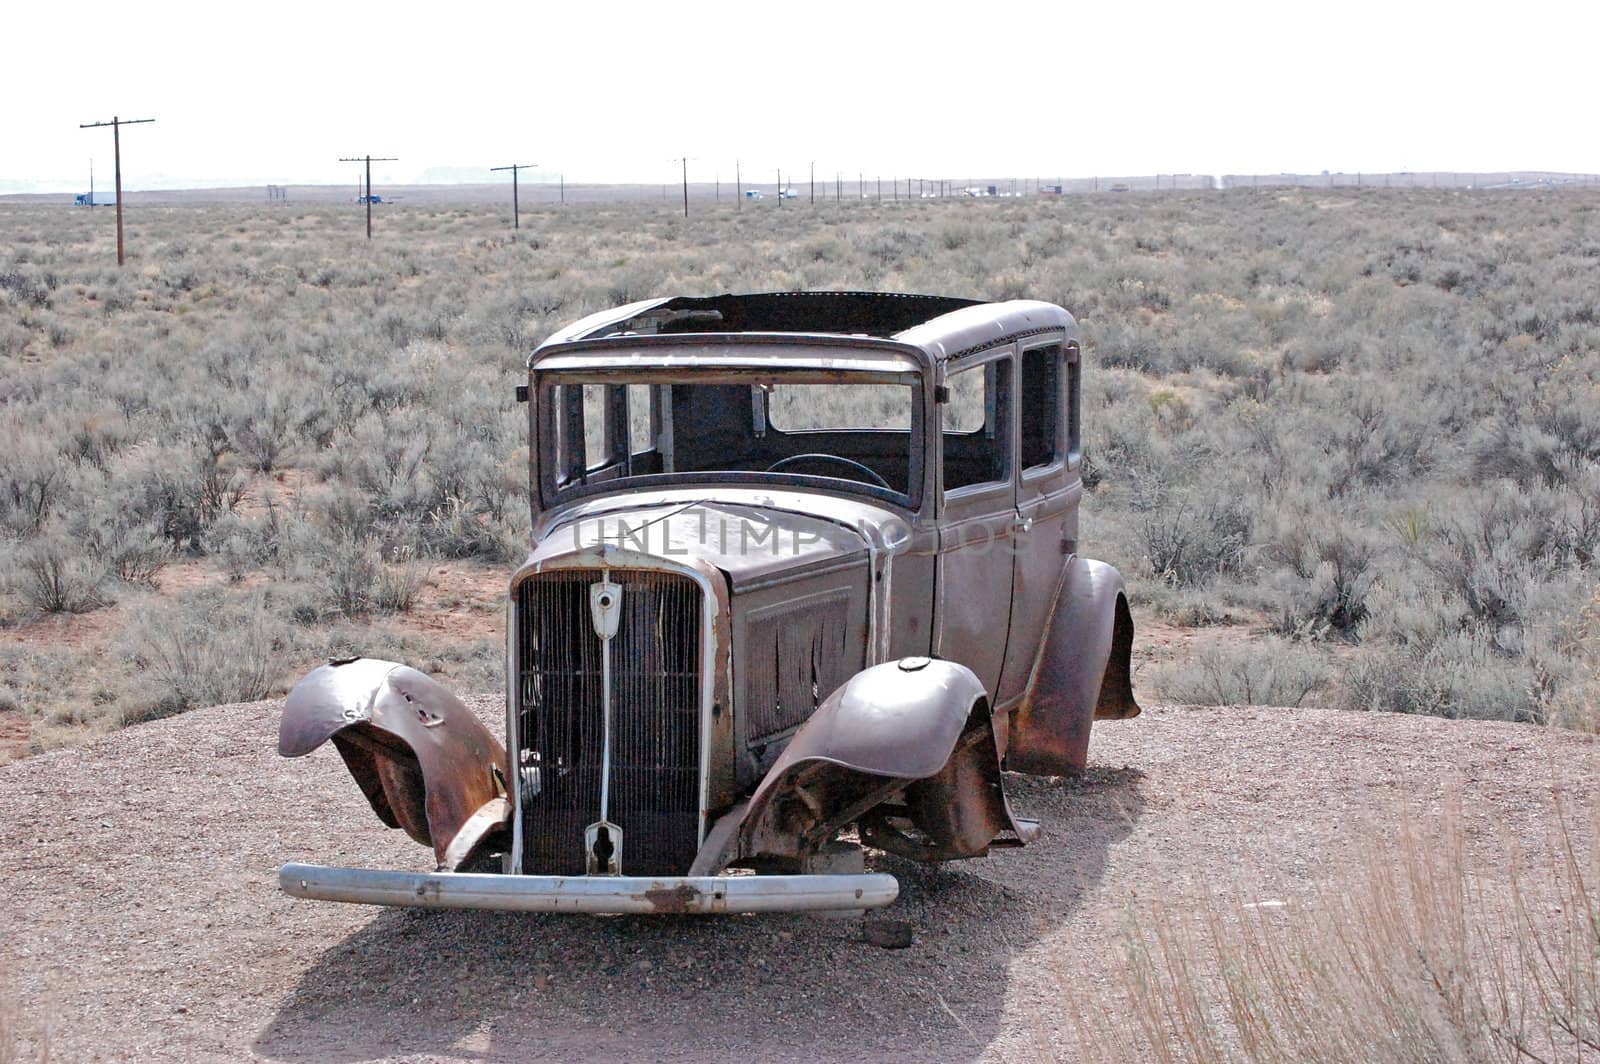 Old-Timey Car in the Desert by RefocusPhoto